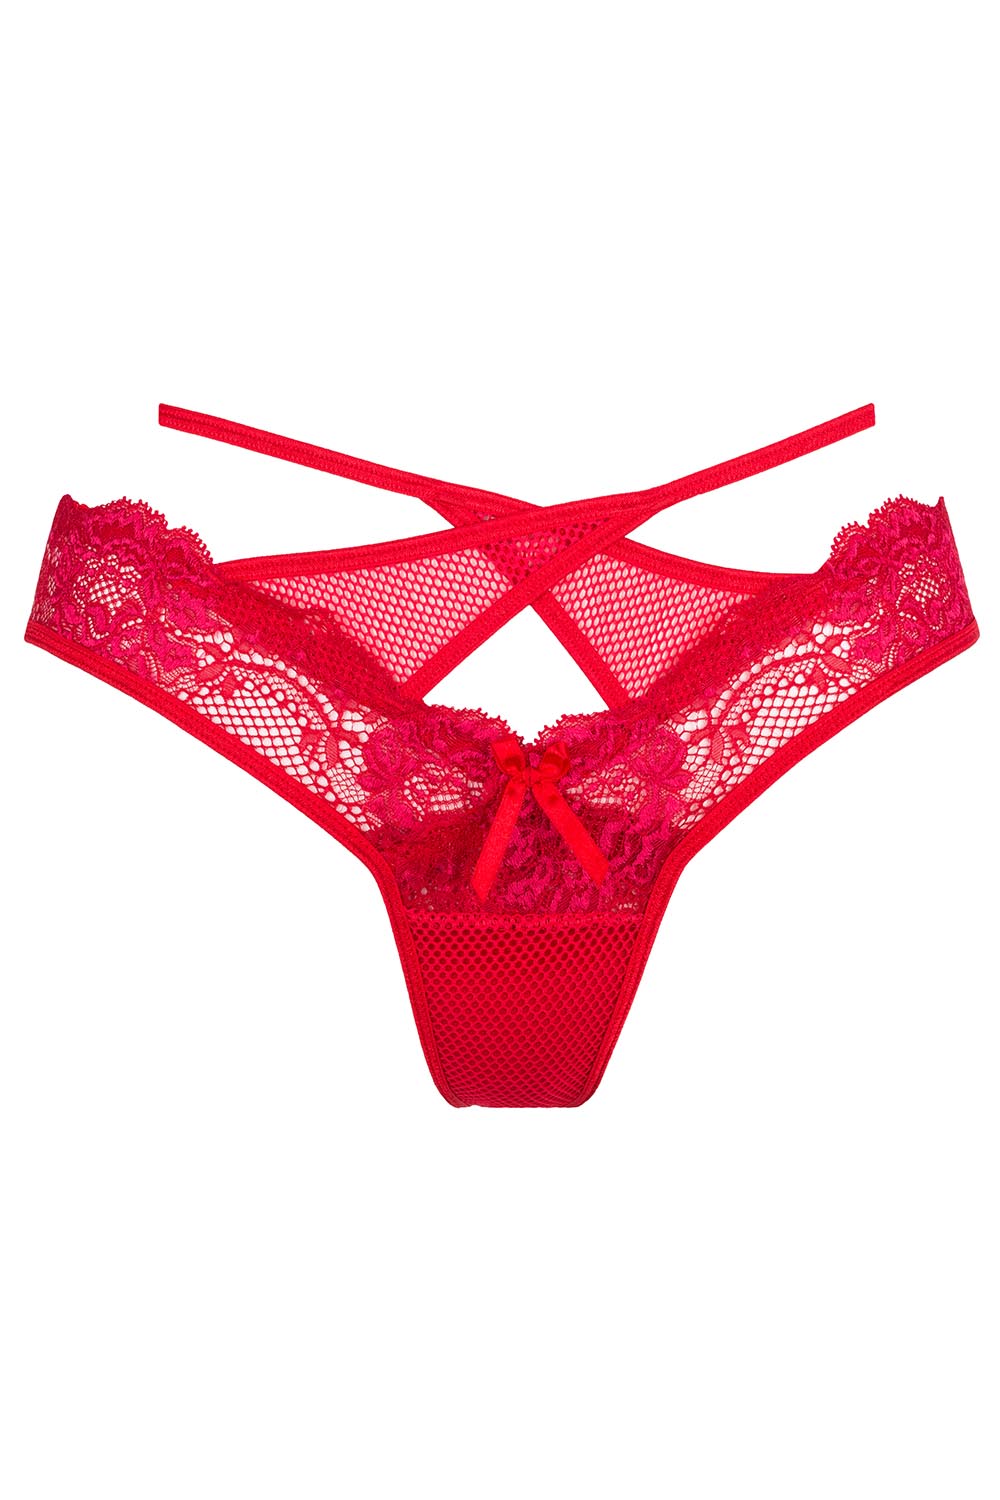 Axami V-6748 Rush women's thong with lace straps | Red